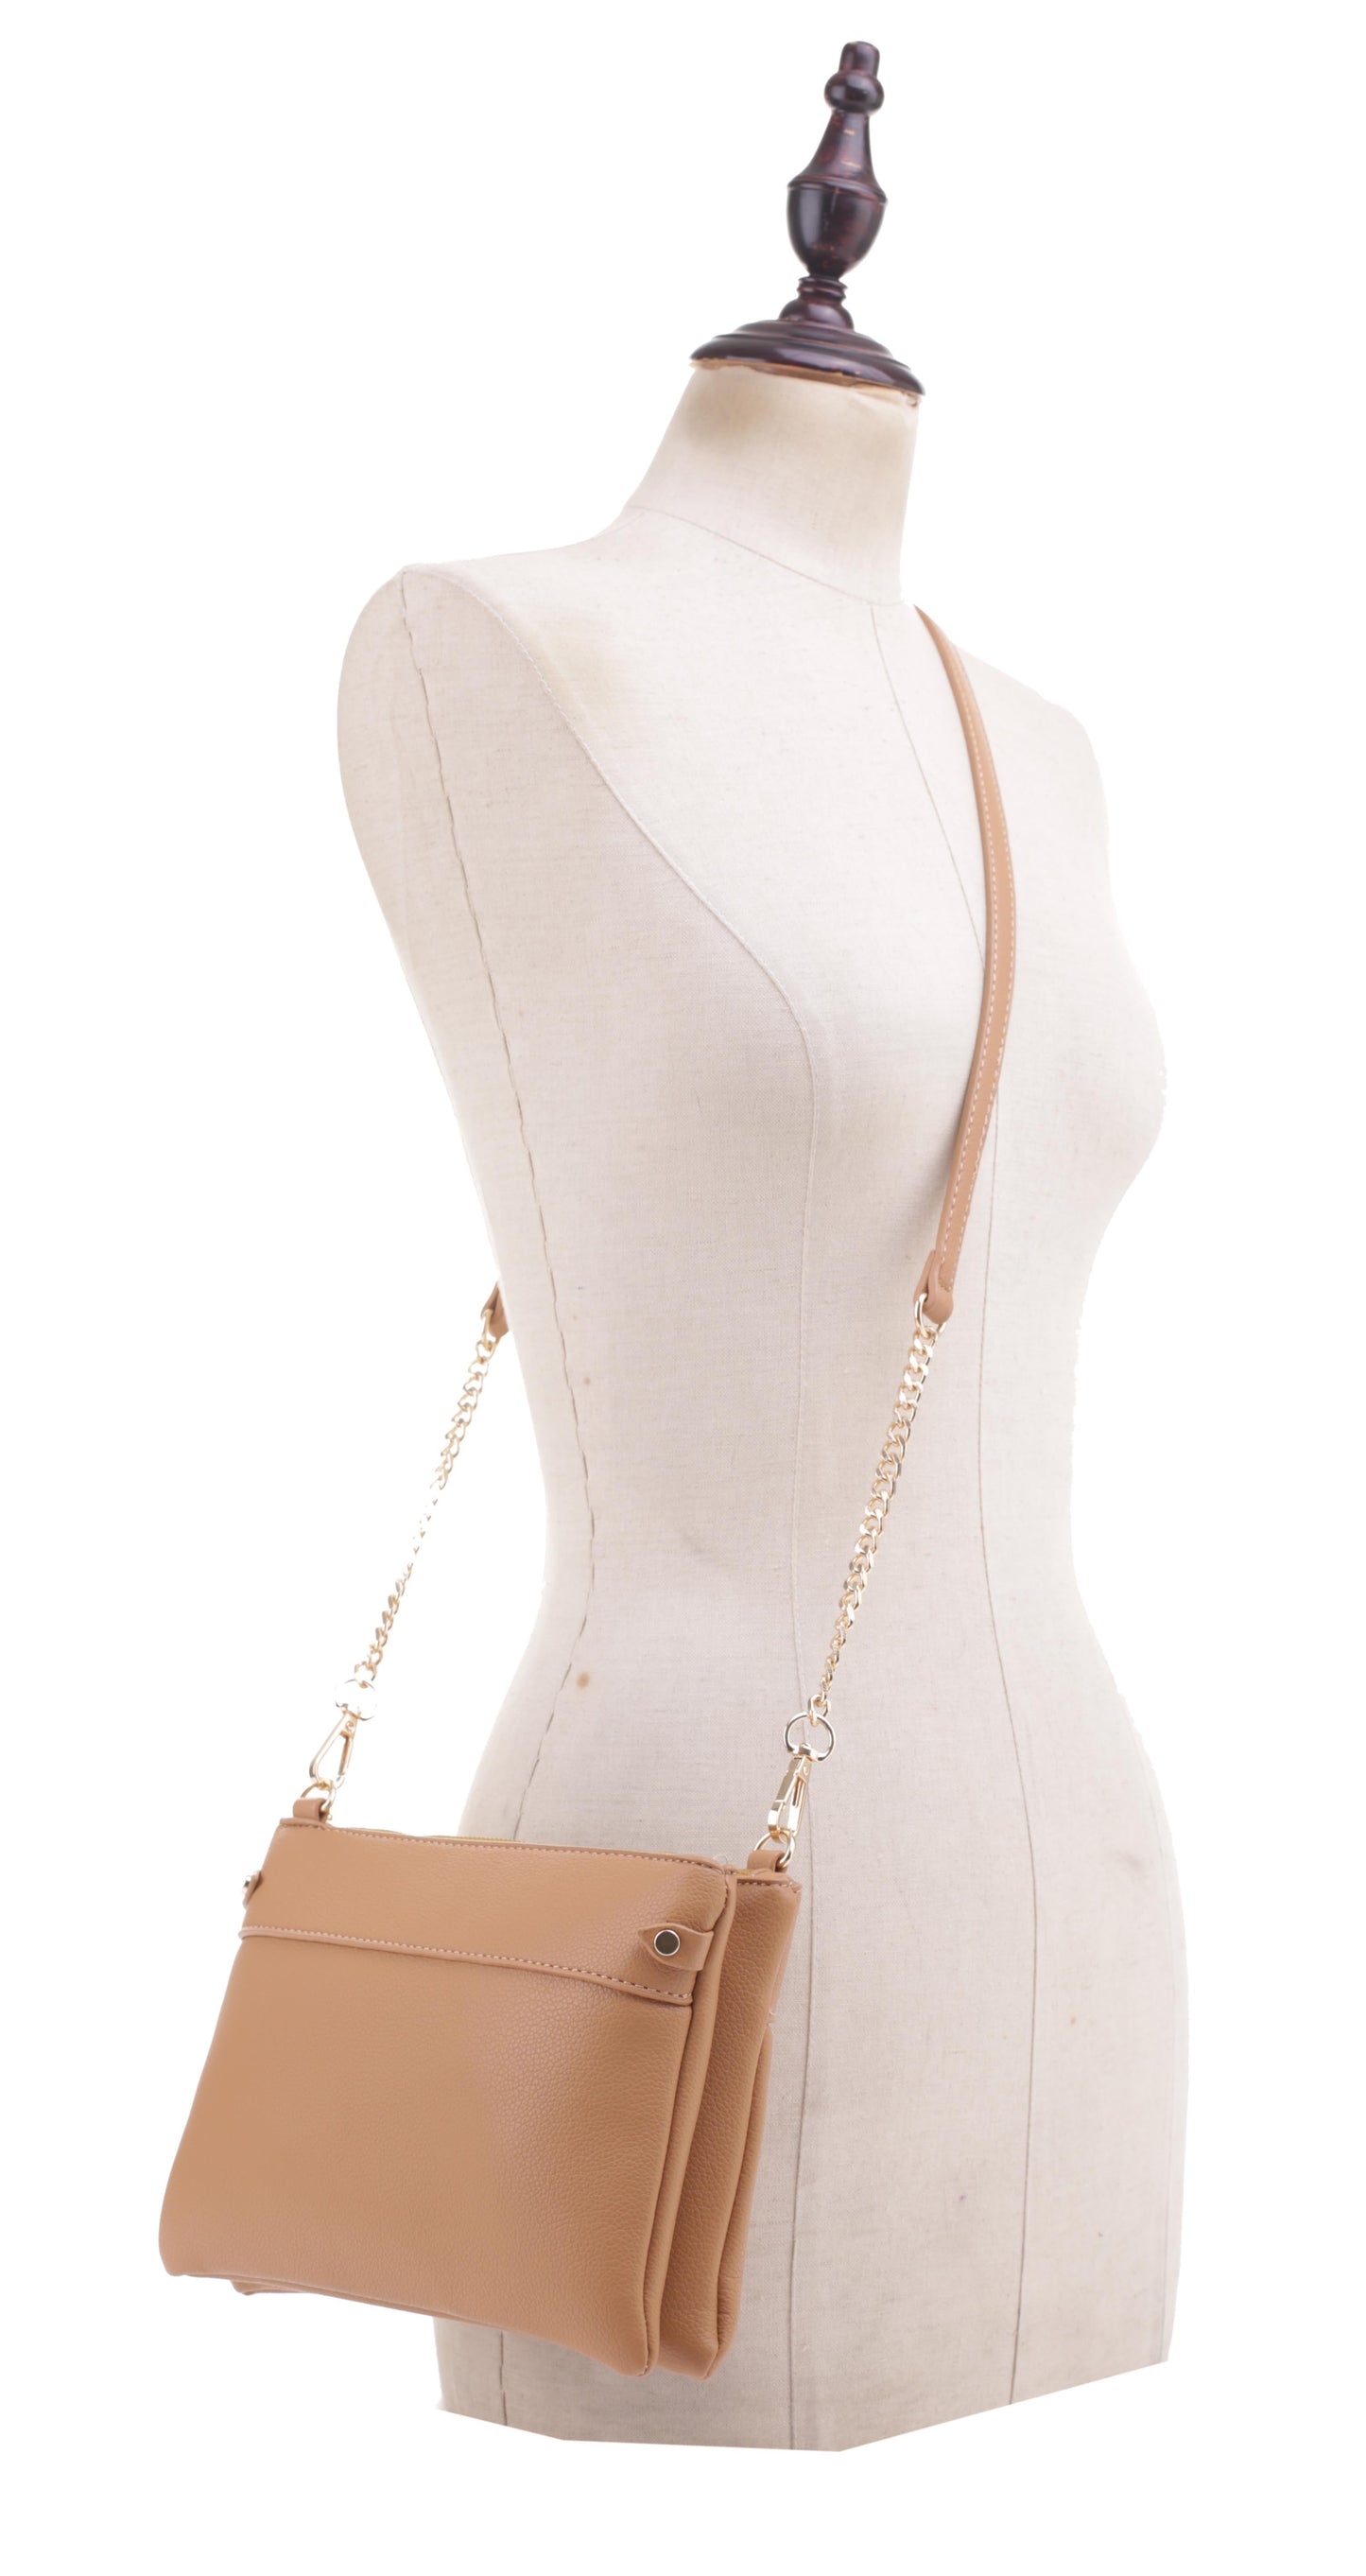 Leather Metal Chain Strap Triple Compartment Crossbody